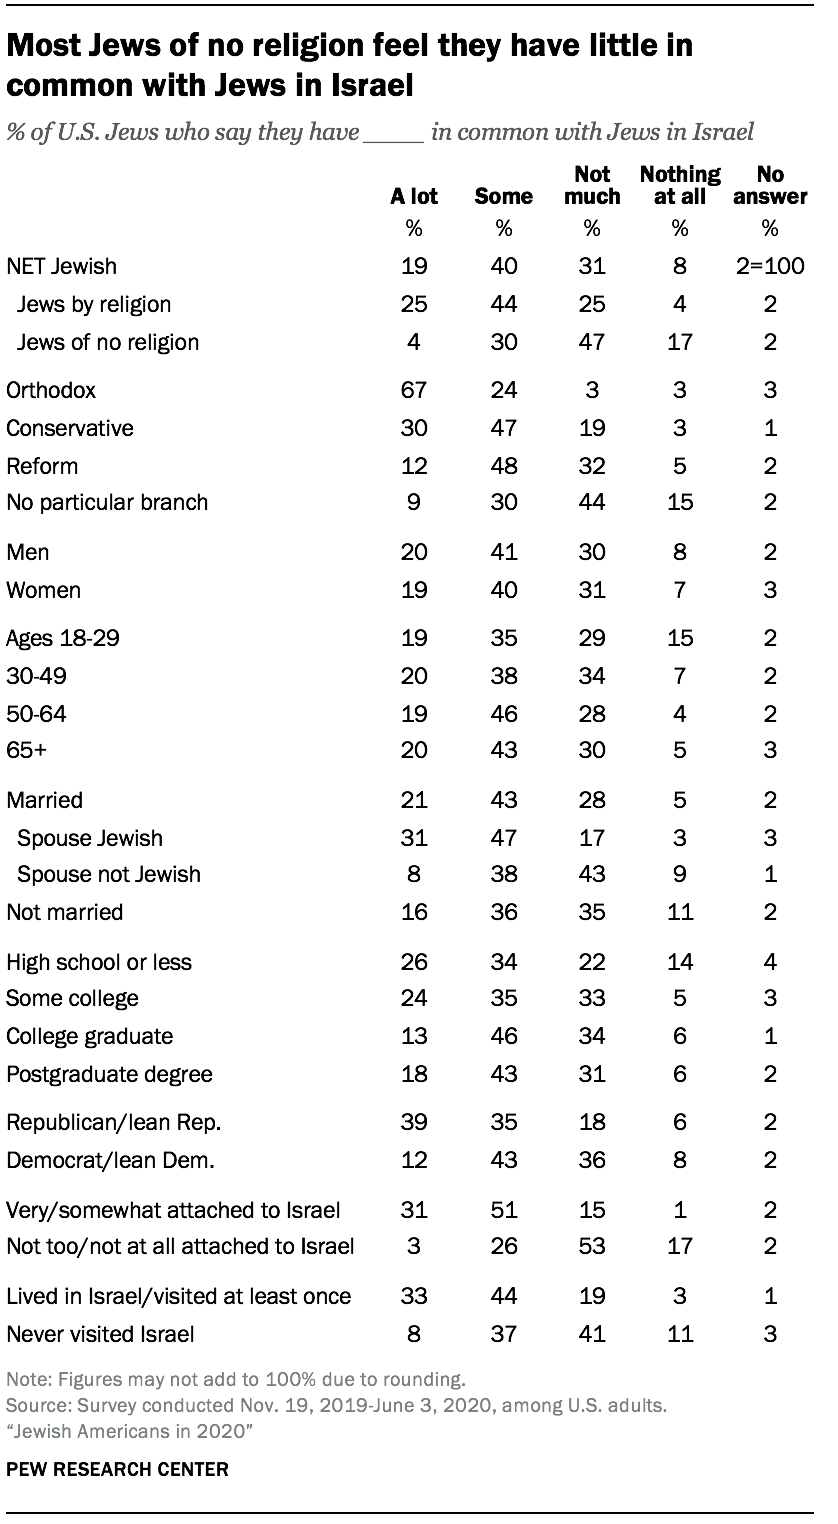 Most Jews of no religion feel they have little in common with Jews in Israel